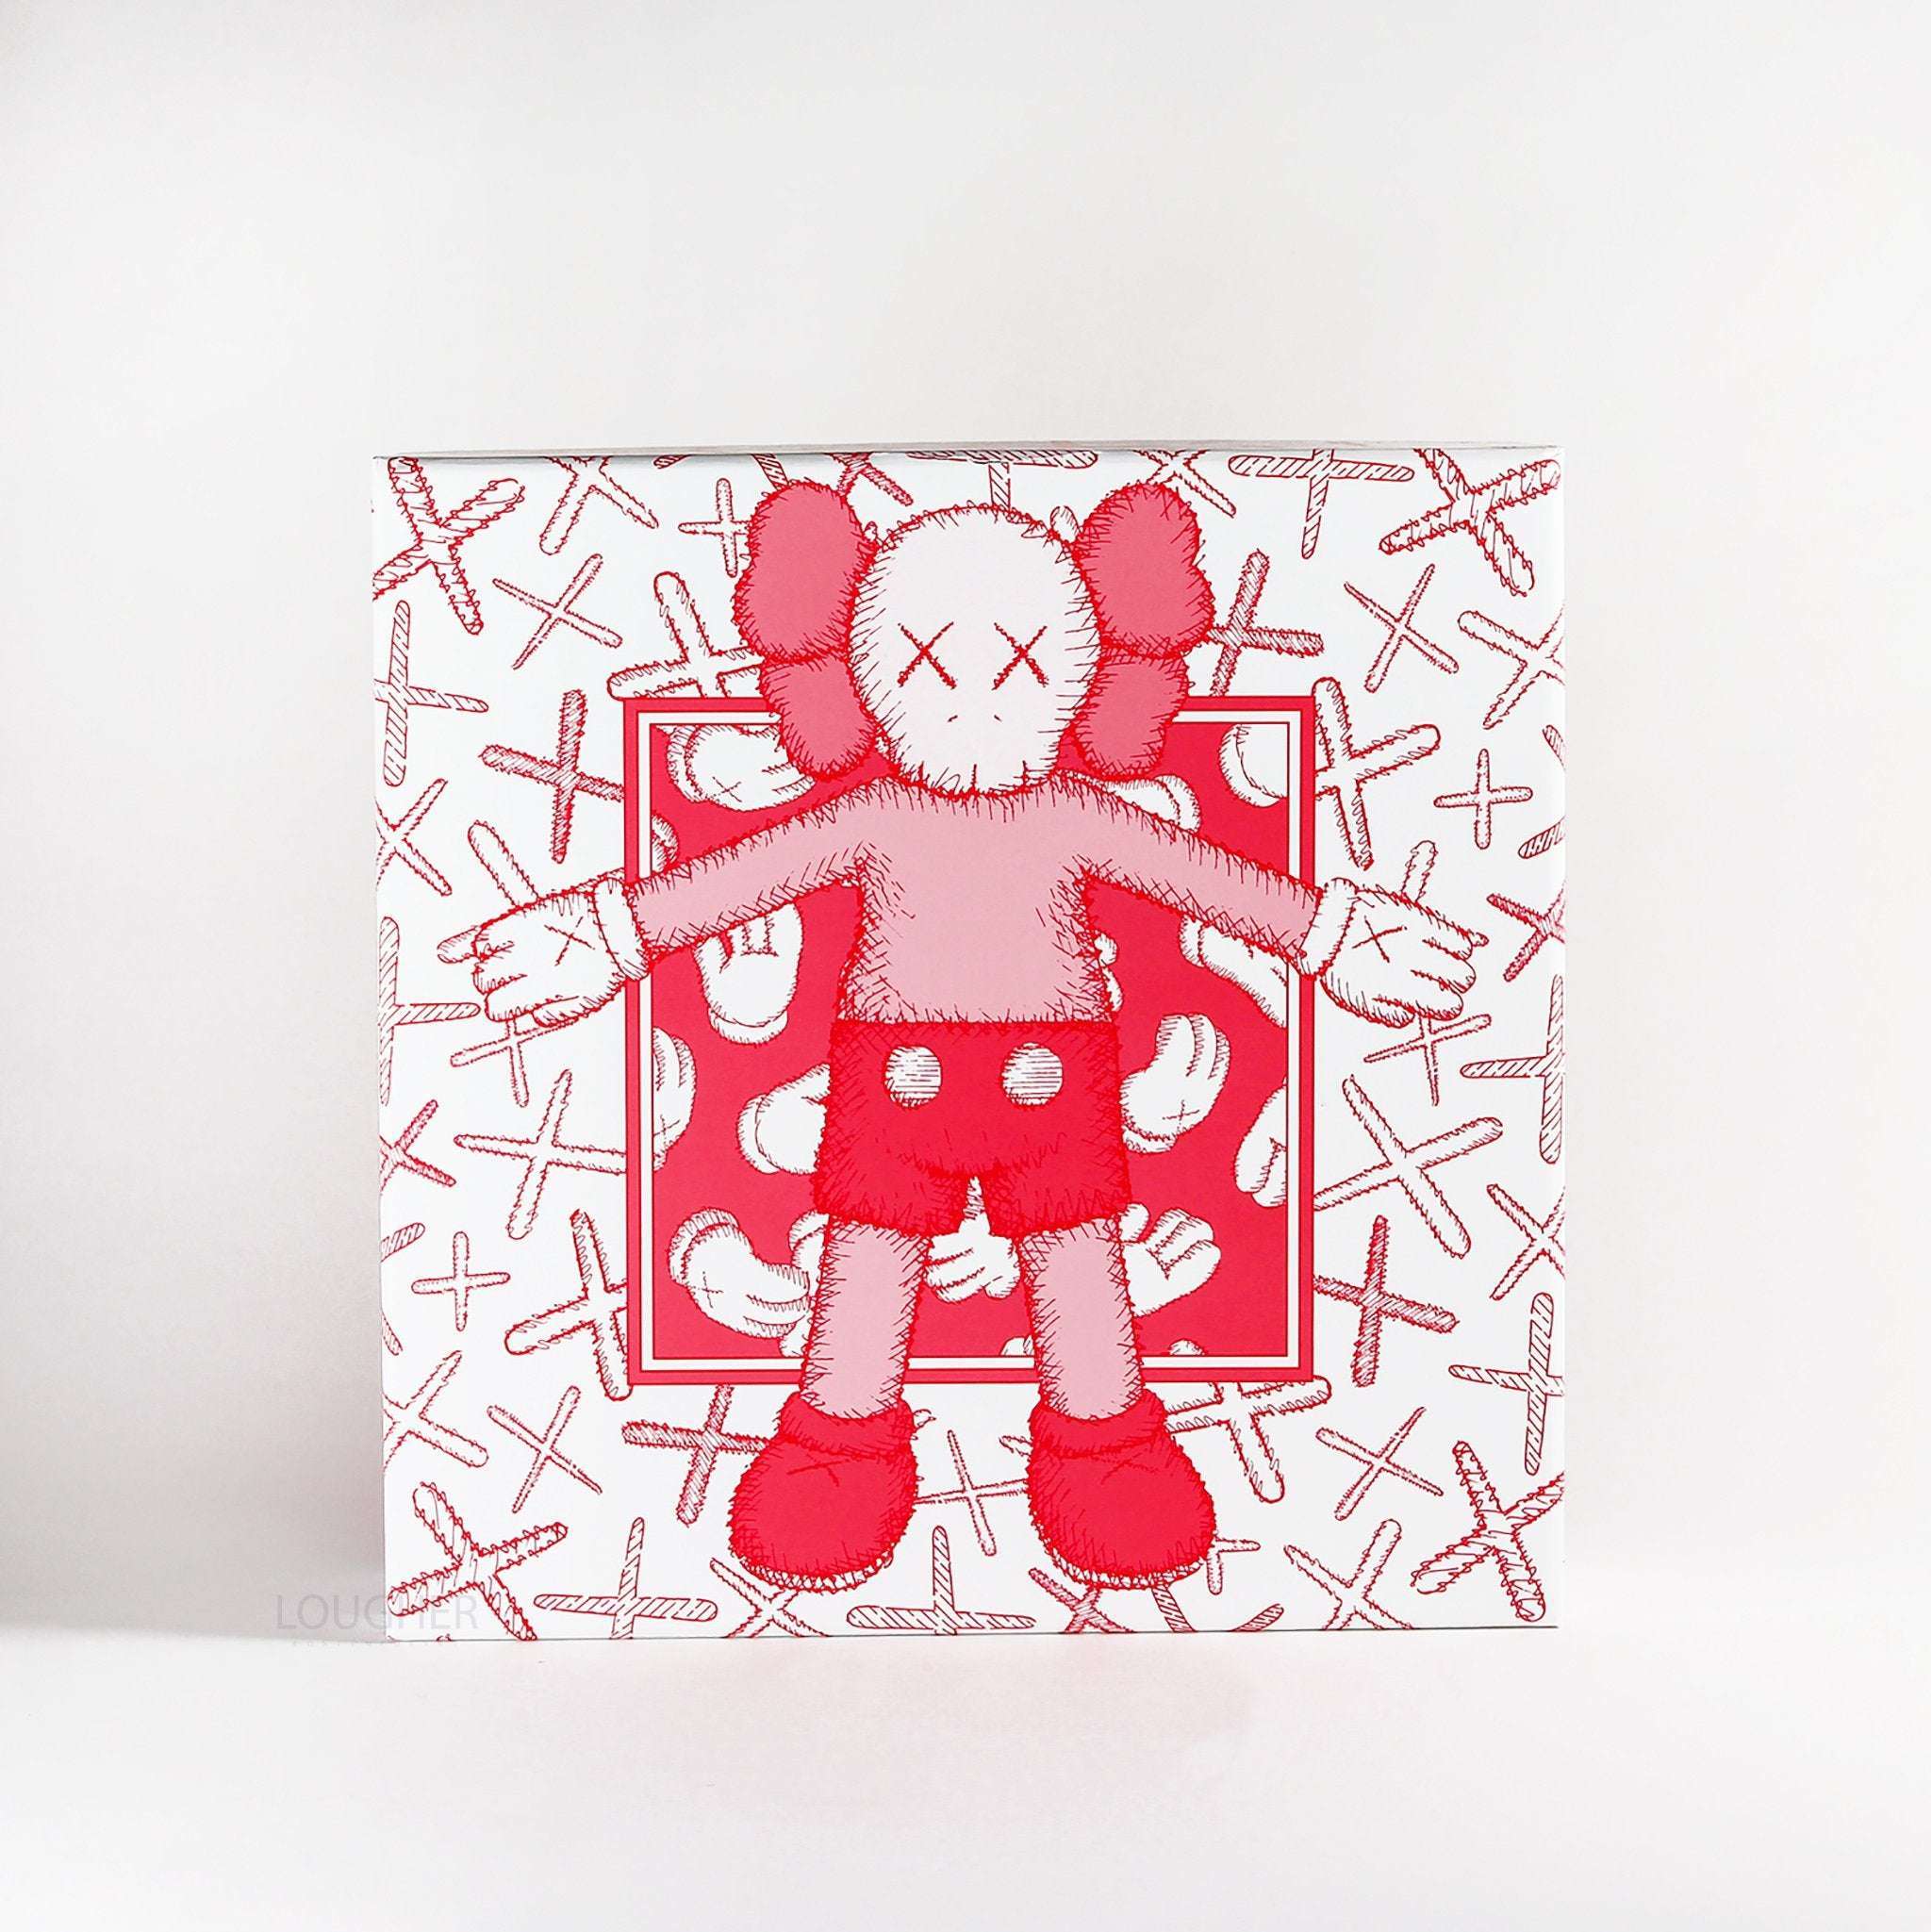 KAWS, Limited Ceramic Plate Set - Red (Set of 4), 2019 For Sale - Lougher Contemporary